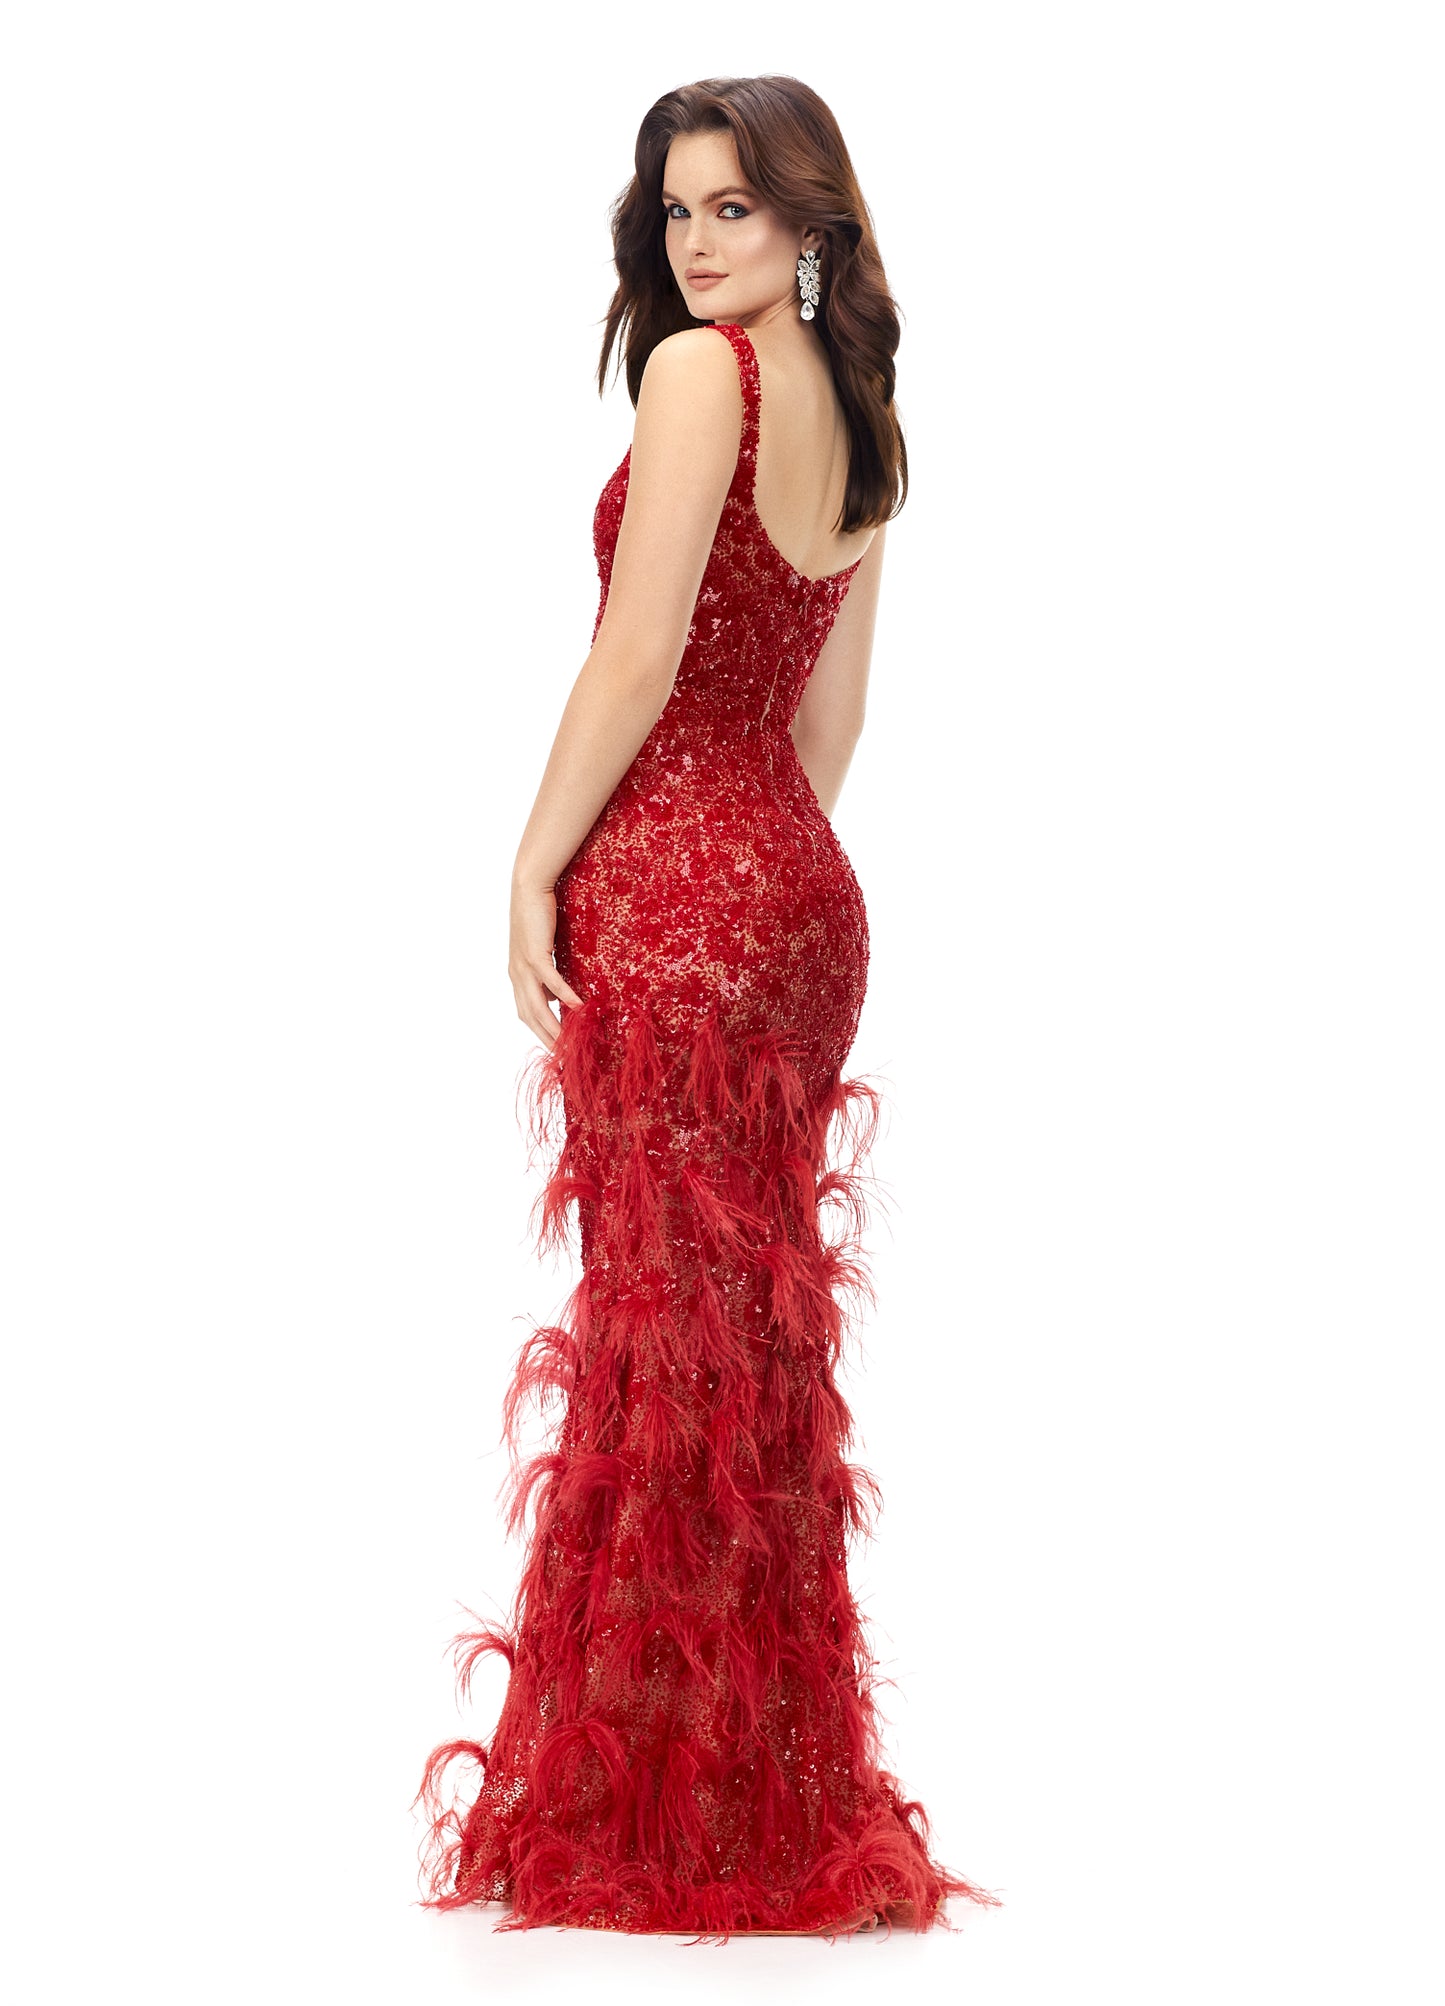 Ashley Lauren 11279 Sequin & Feather Evening Gown Prom Dress